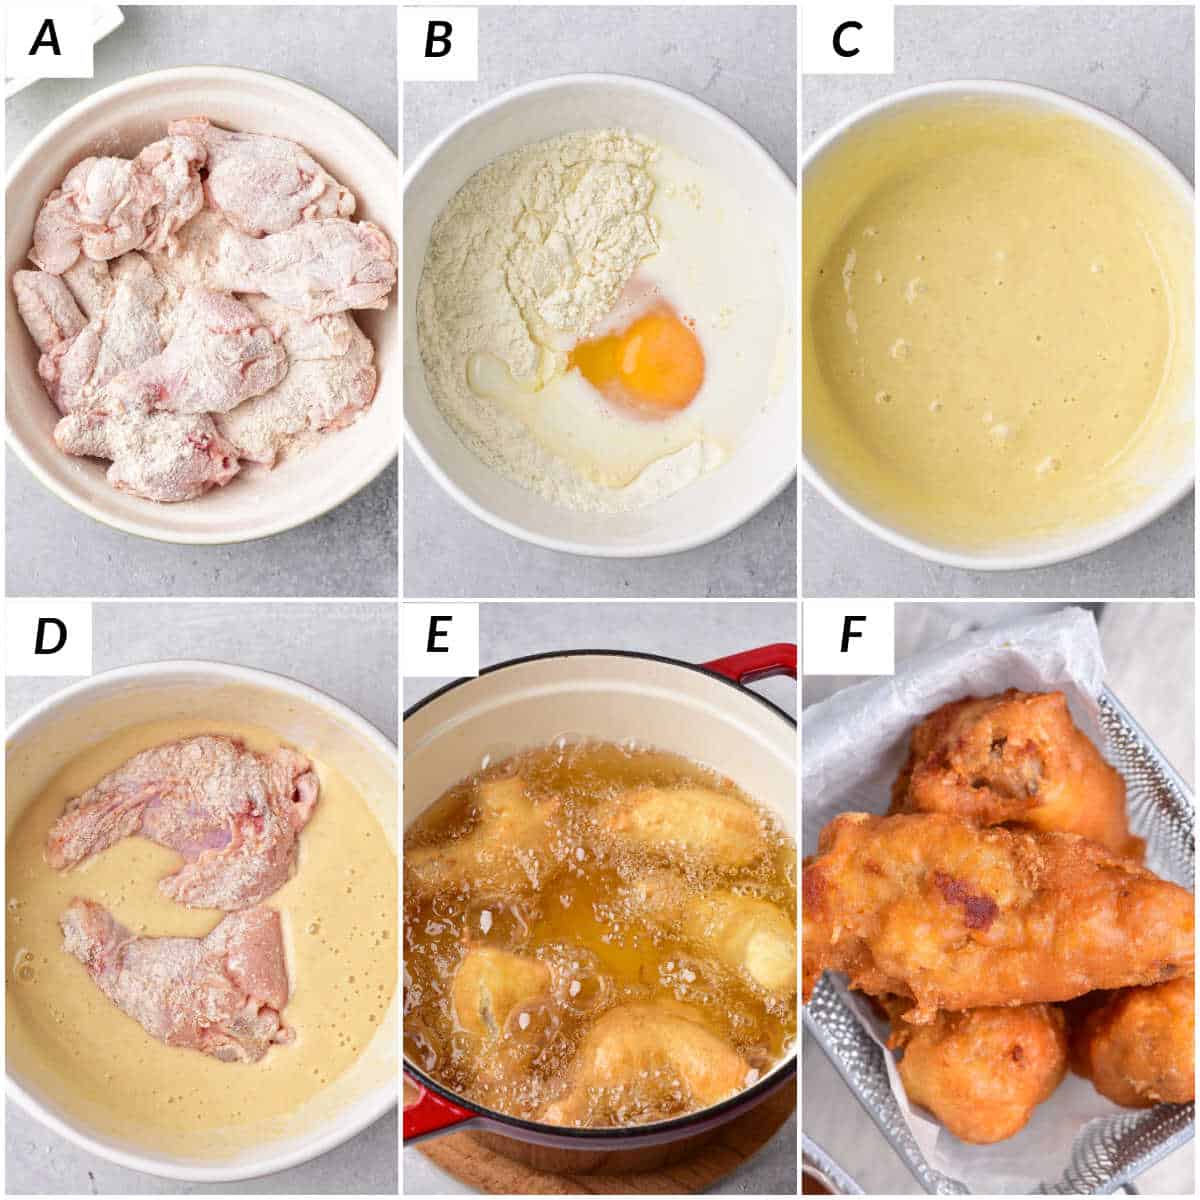 image collage showing the steps for making deep fried chicken wings